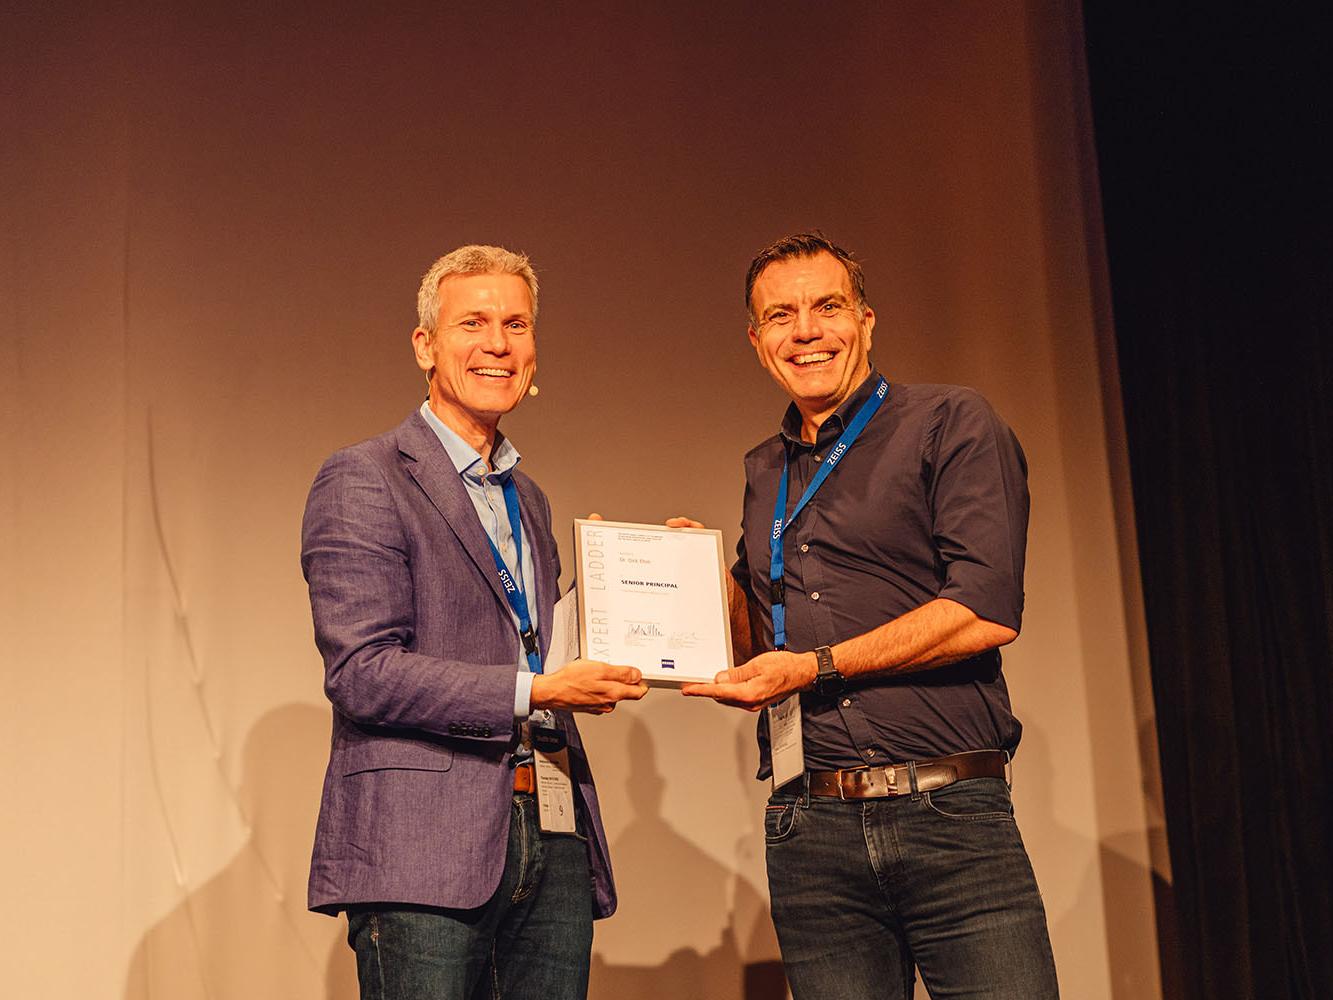 Andreas Pecher - President of ZEISS Semiconductor Manufacturing Technology presents Dirk Ehm with his professional career award